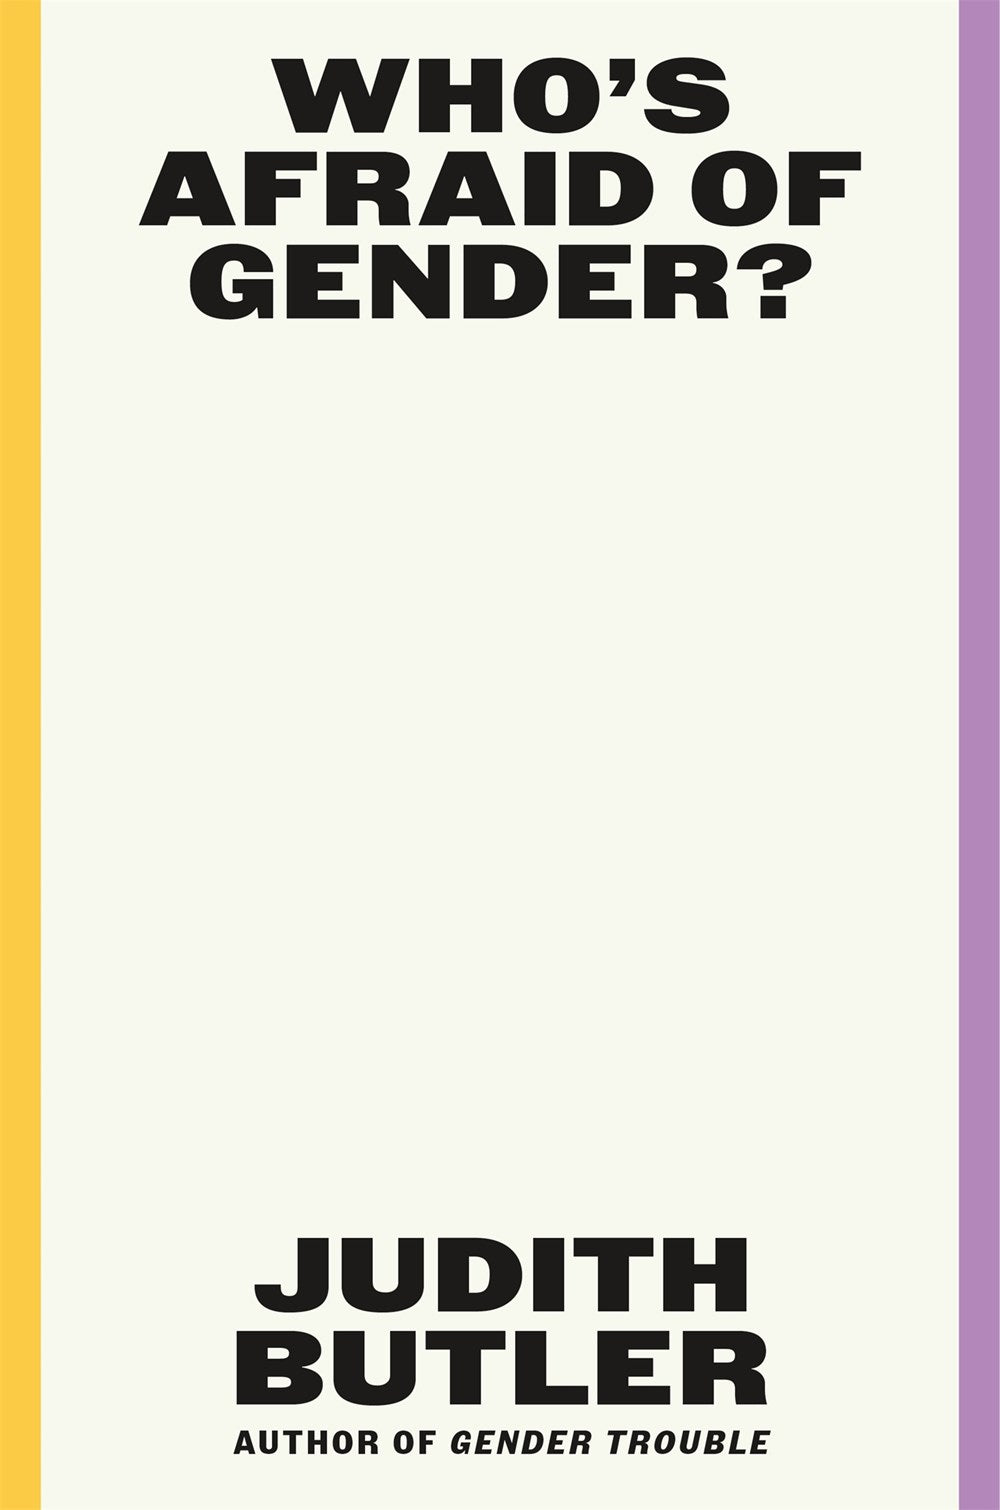 Who's Afraid of Gender? by Judith Butler (3/19/24)